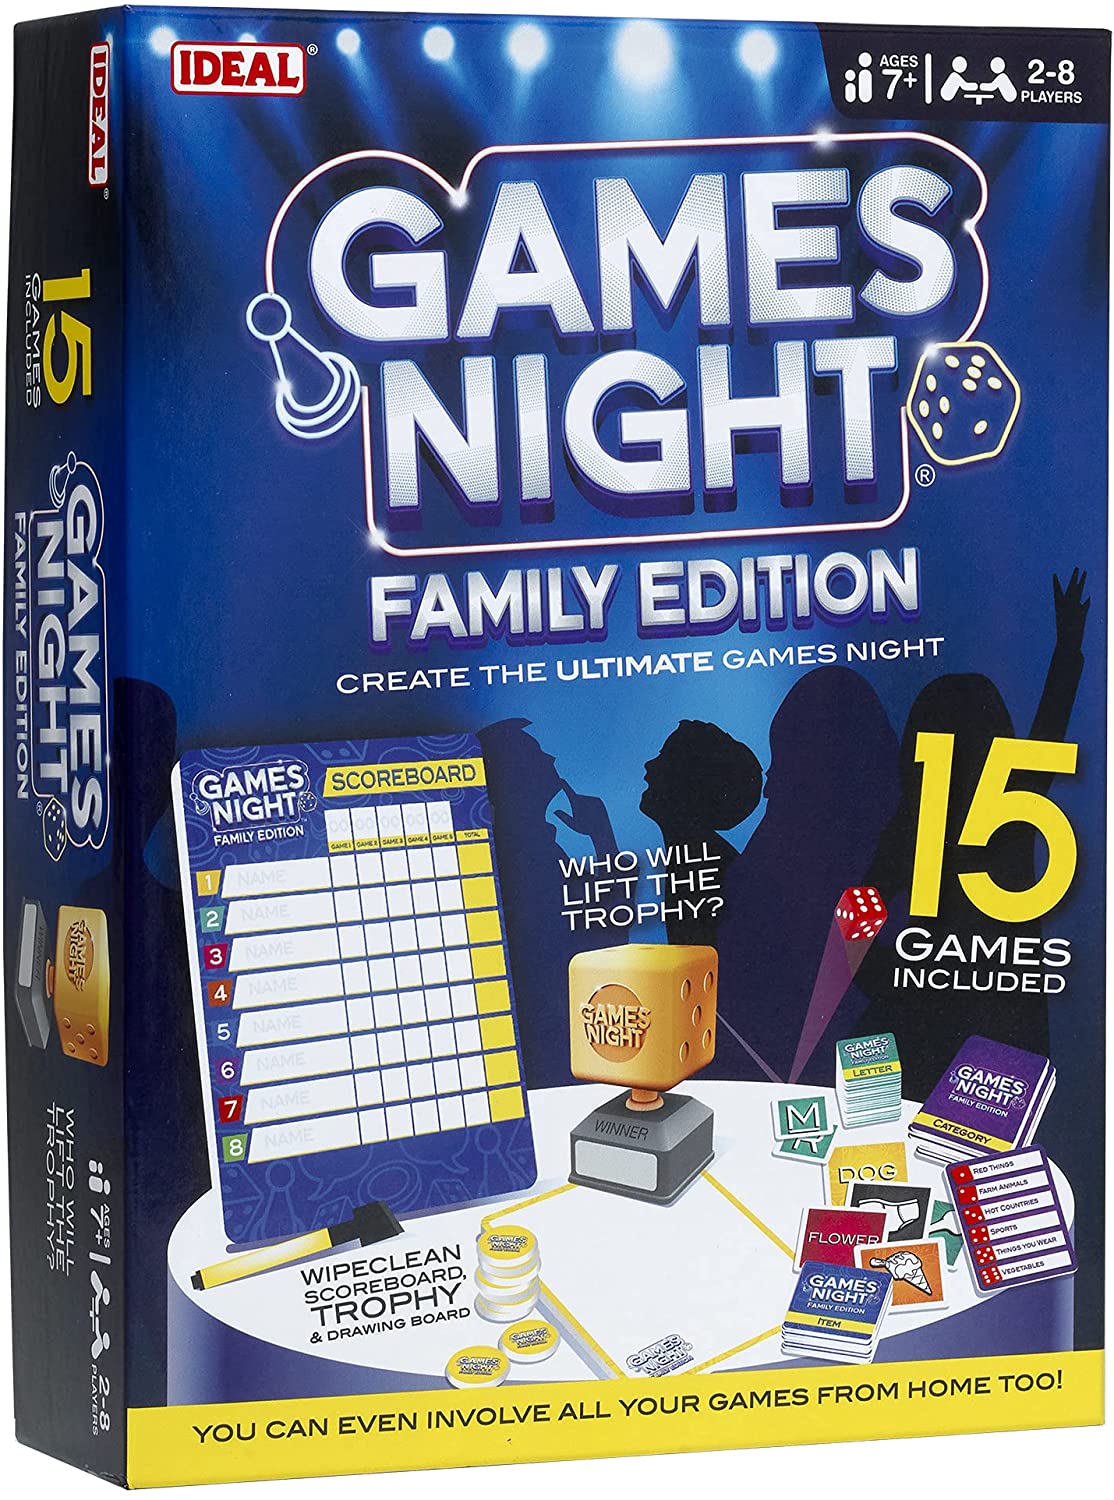 Ideal Games Night - Family Edition